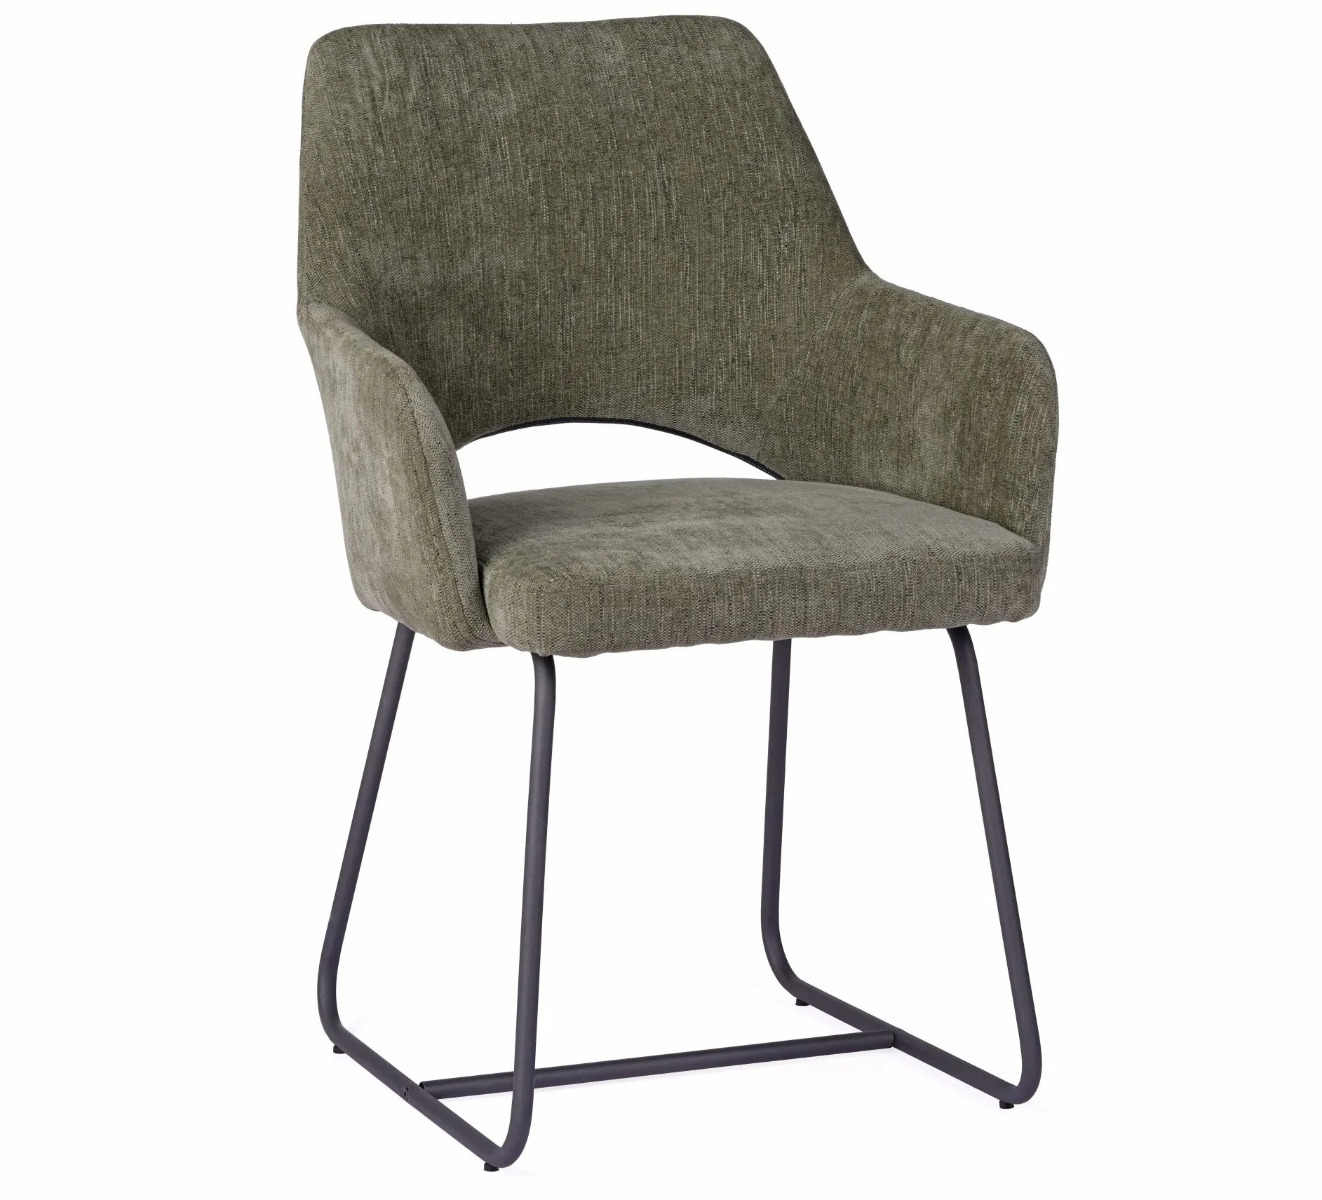 Alex dining chair in Green